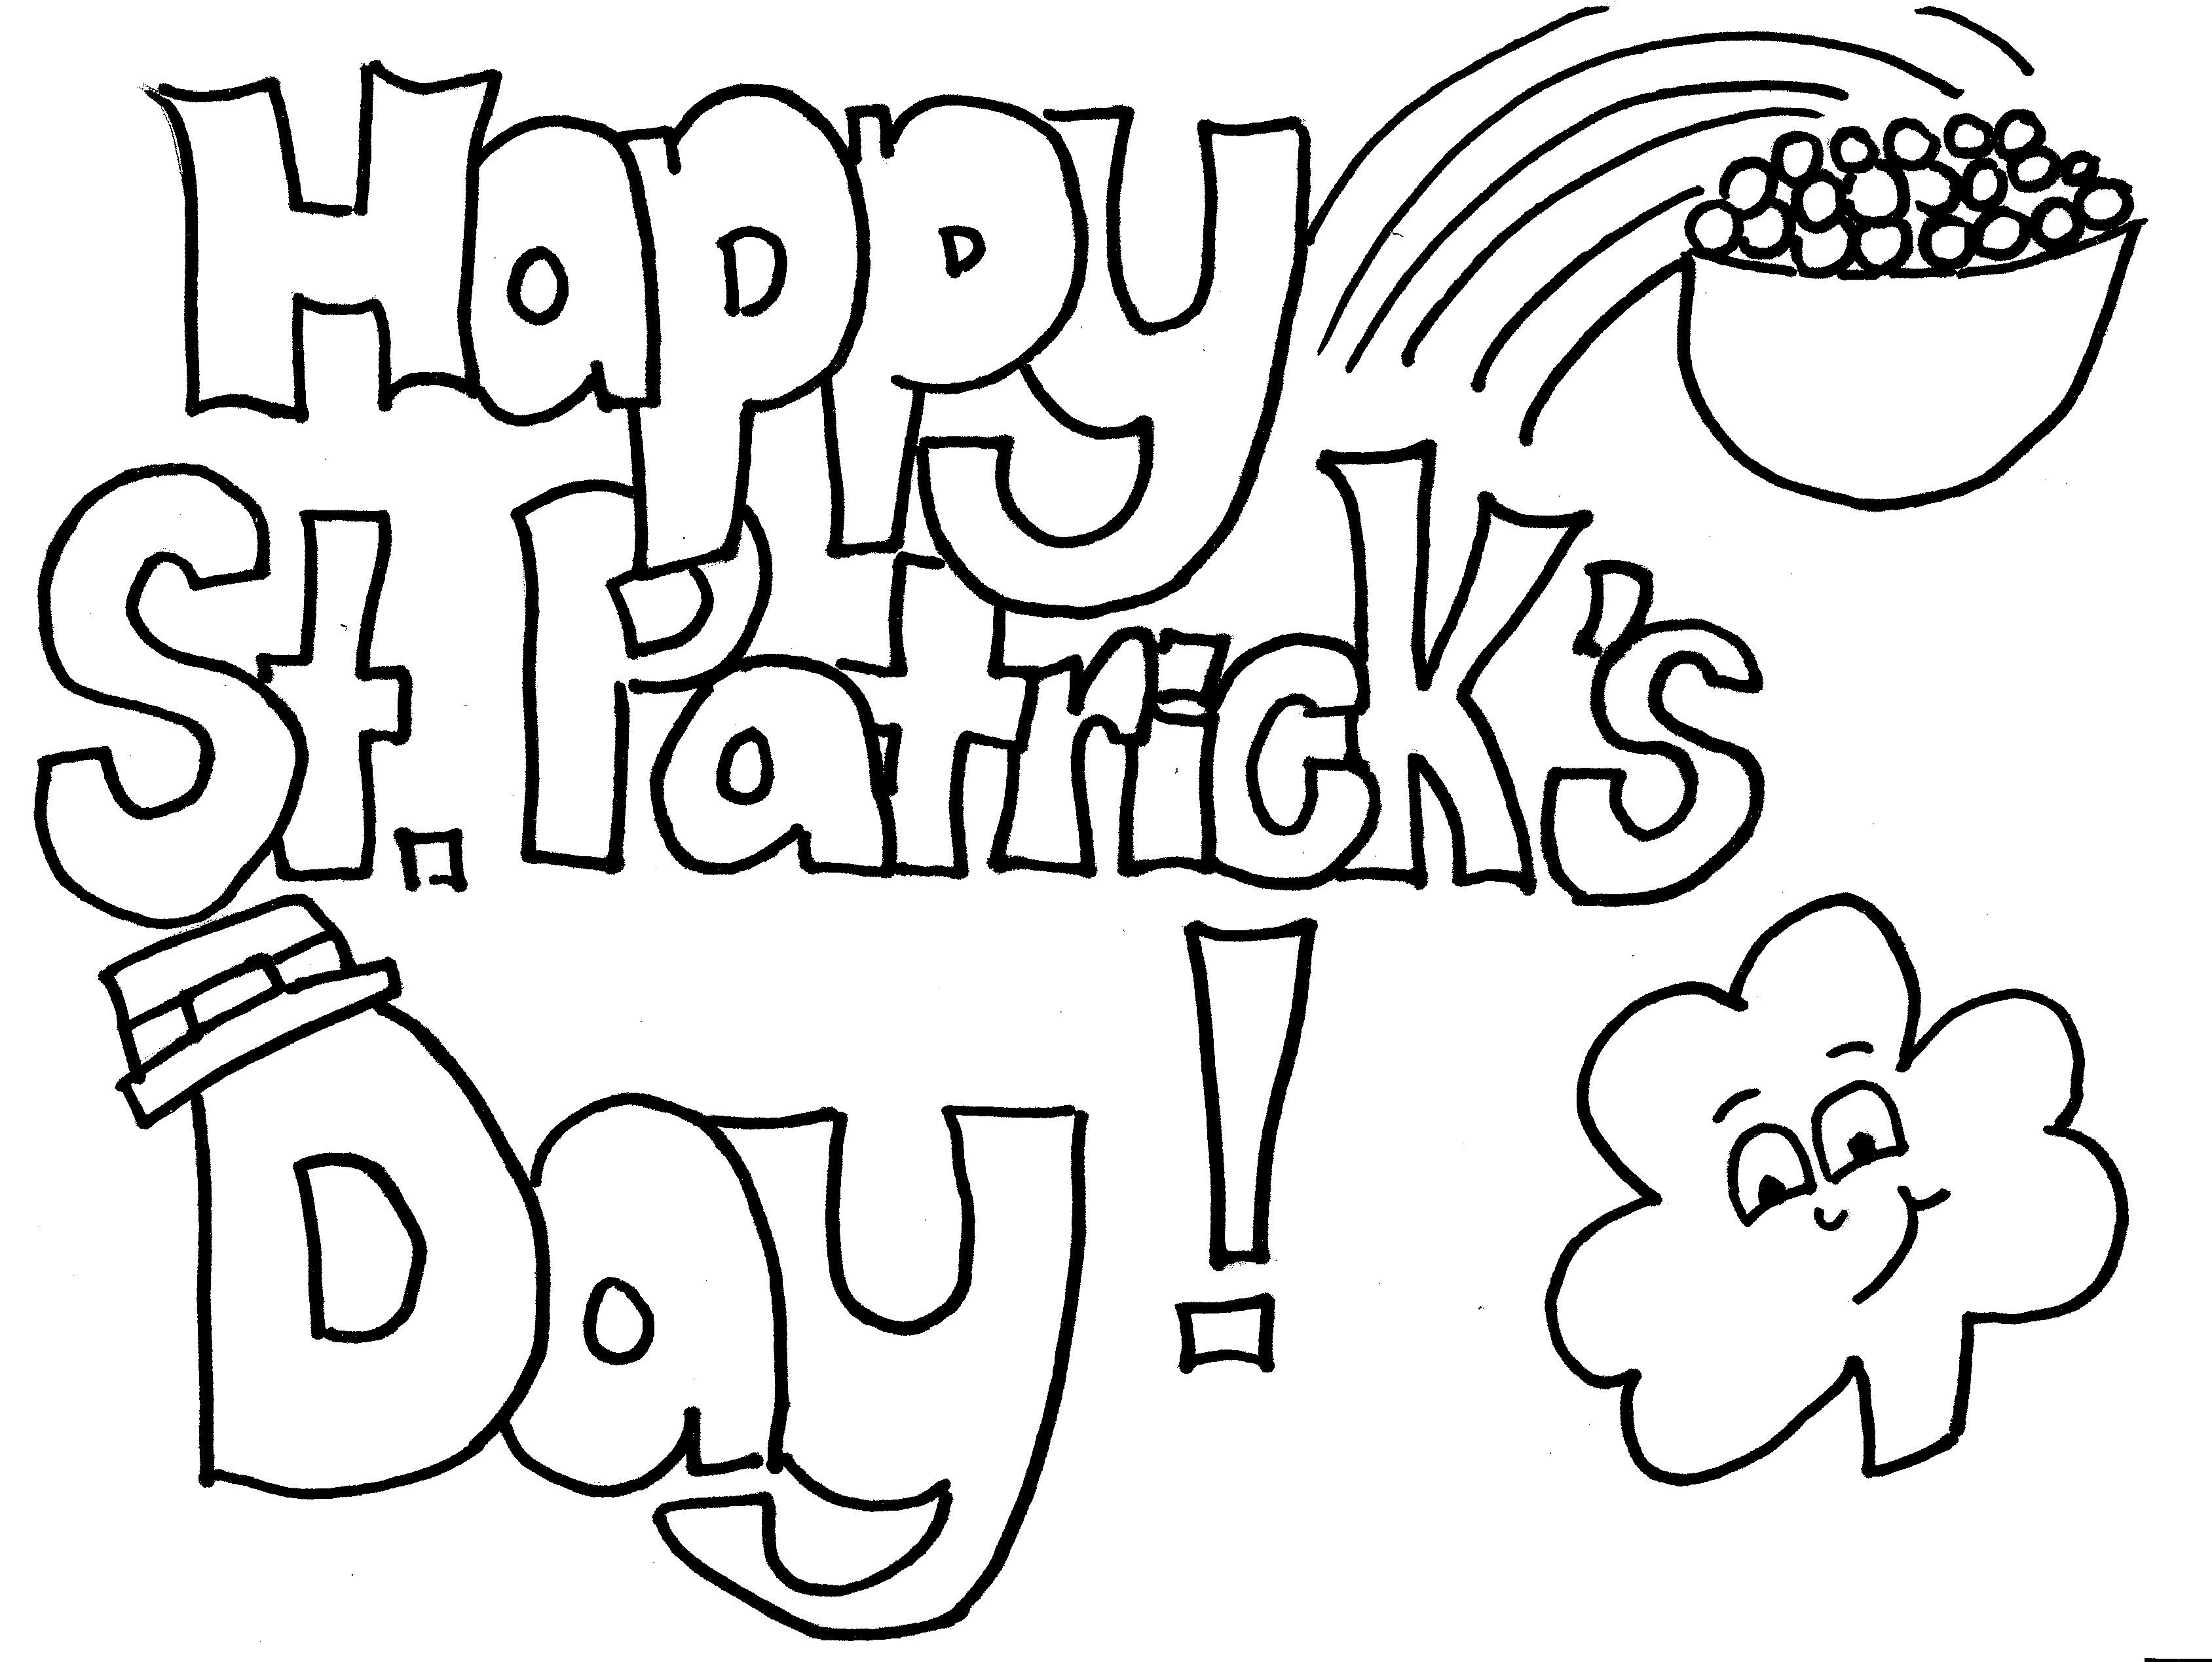 St. Patricks Day Coloring Pages - Dr. Odd